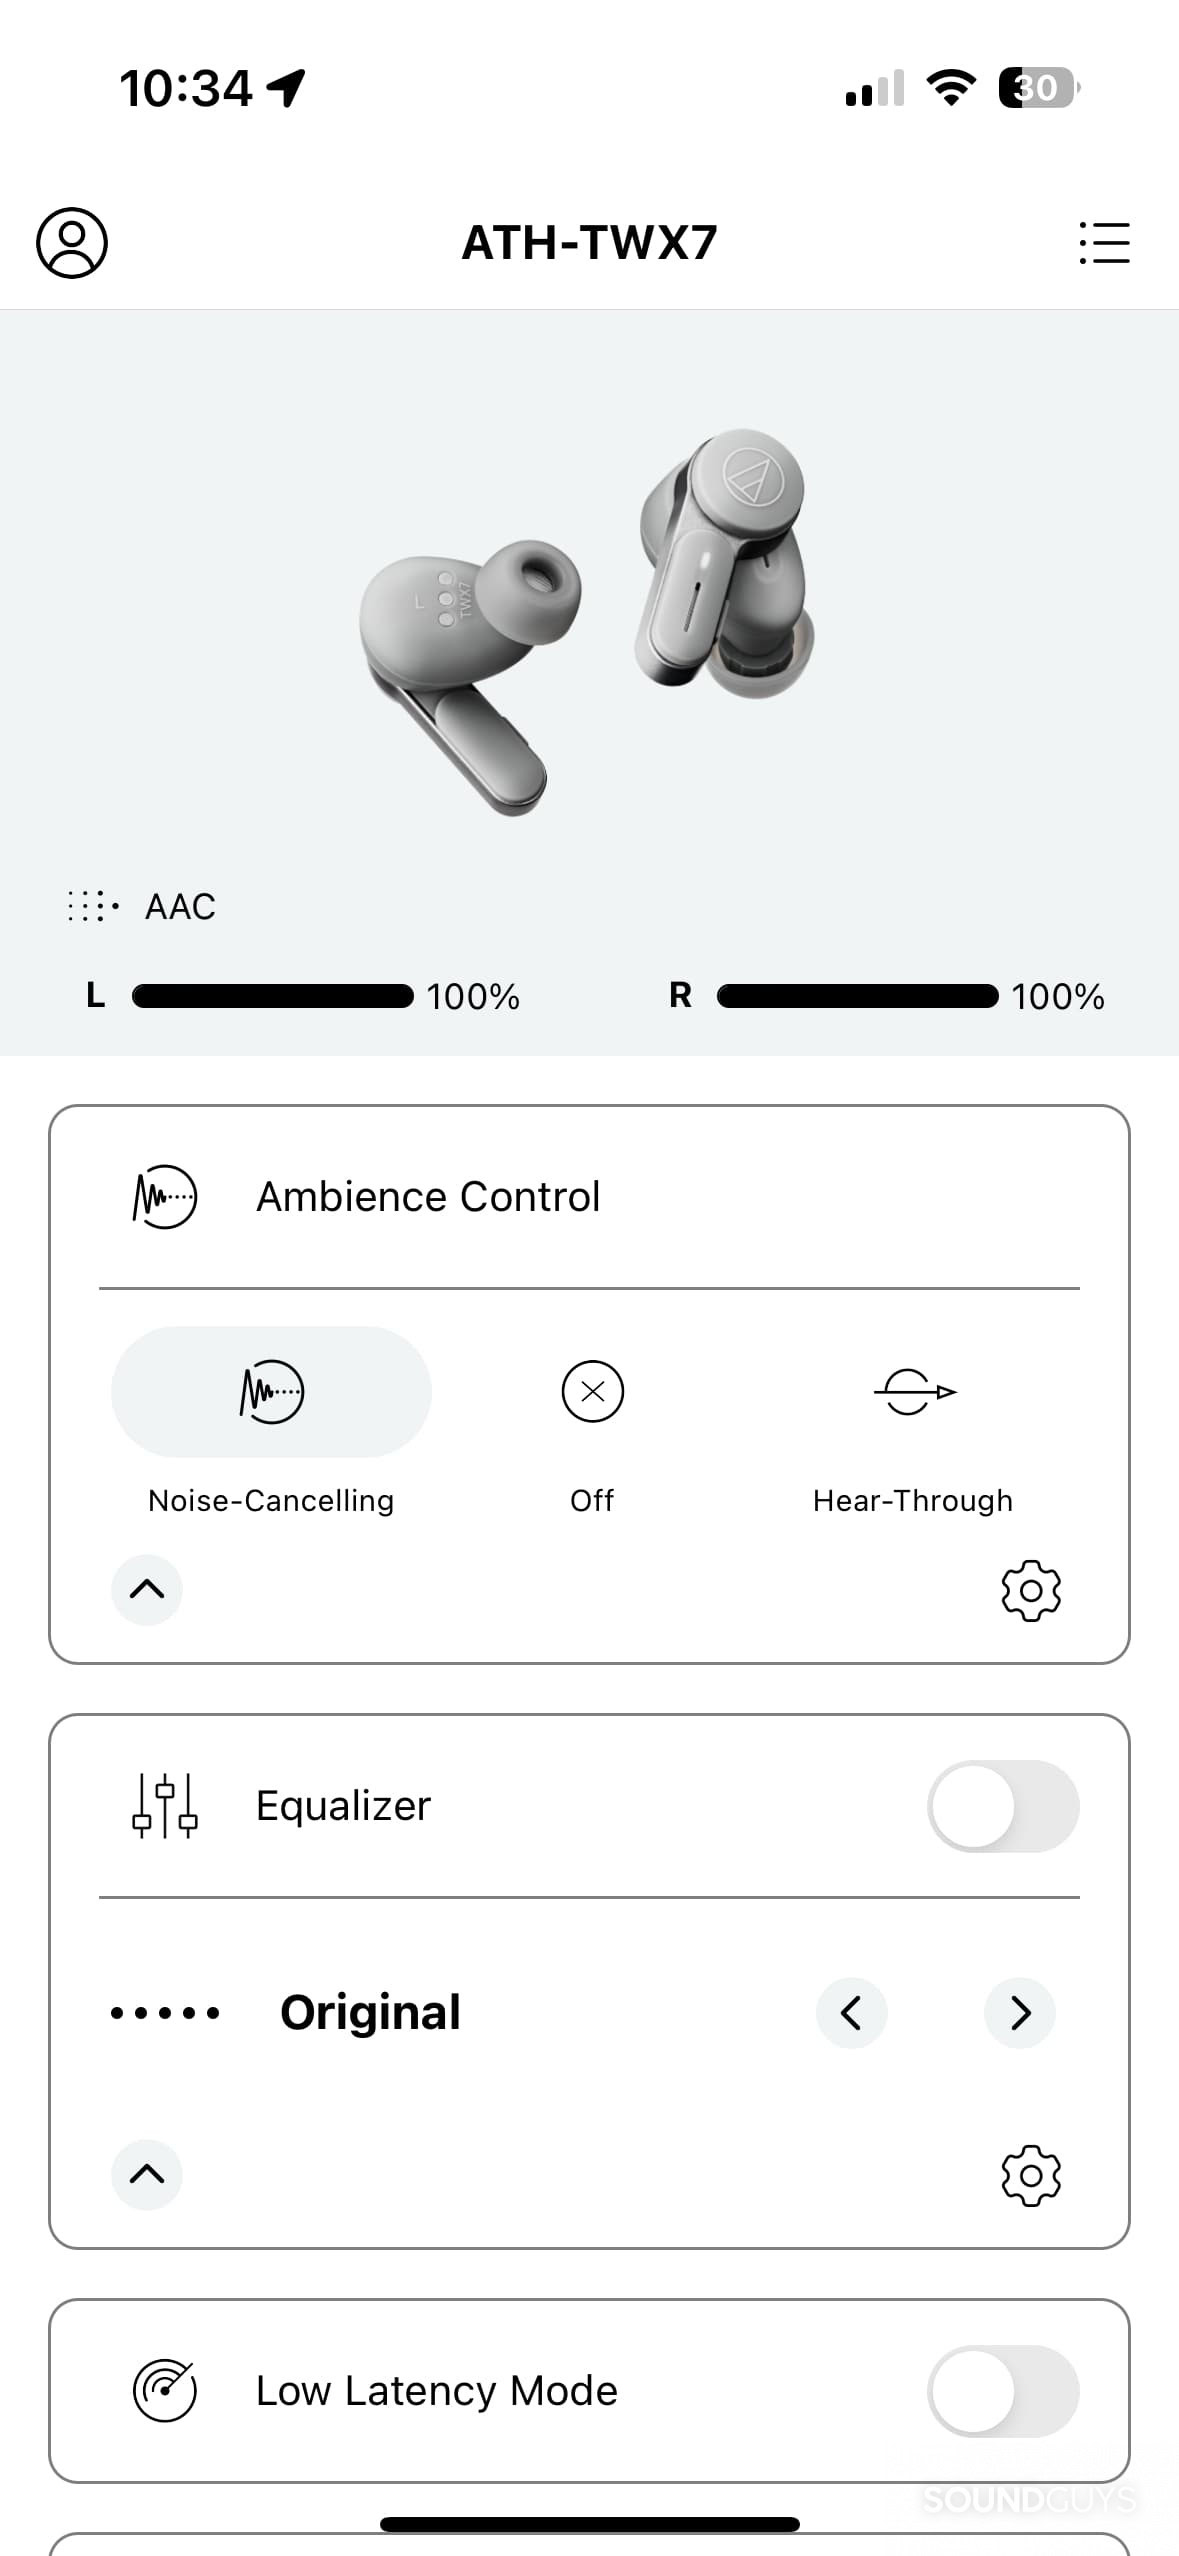 Audio-Technica ATH-TWX7 A-T Connect app home screen.